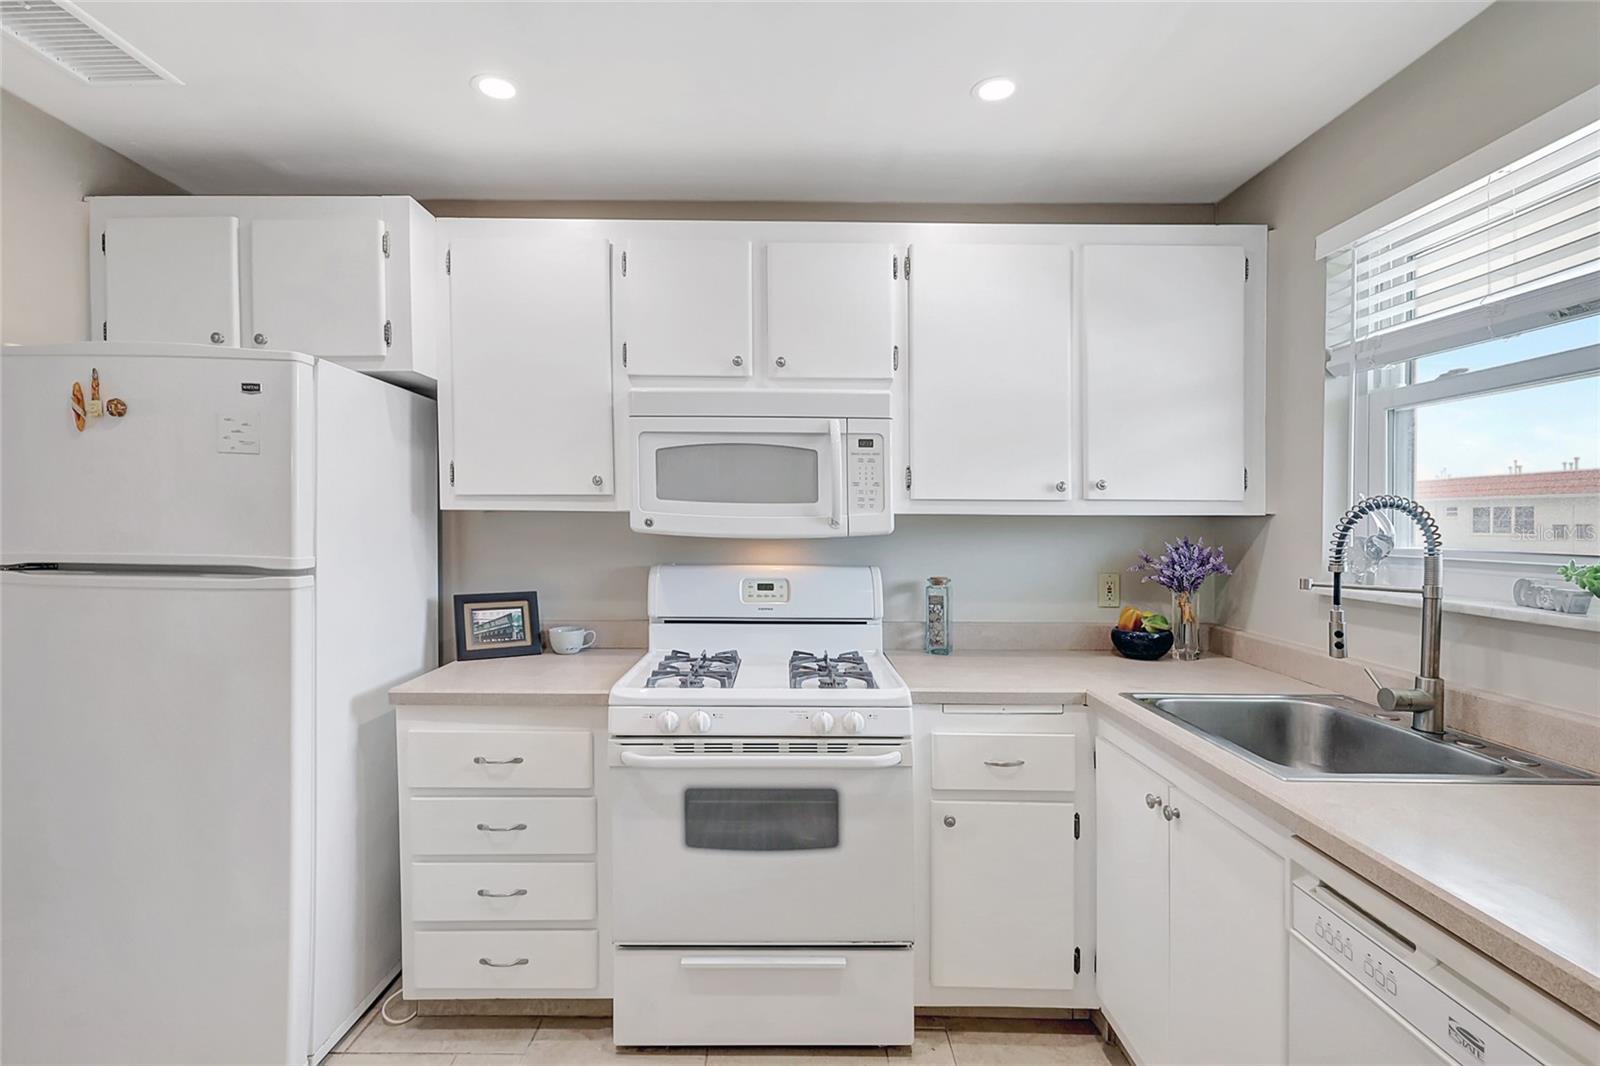 White cabinets and appliances